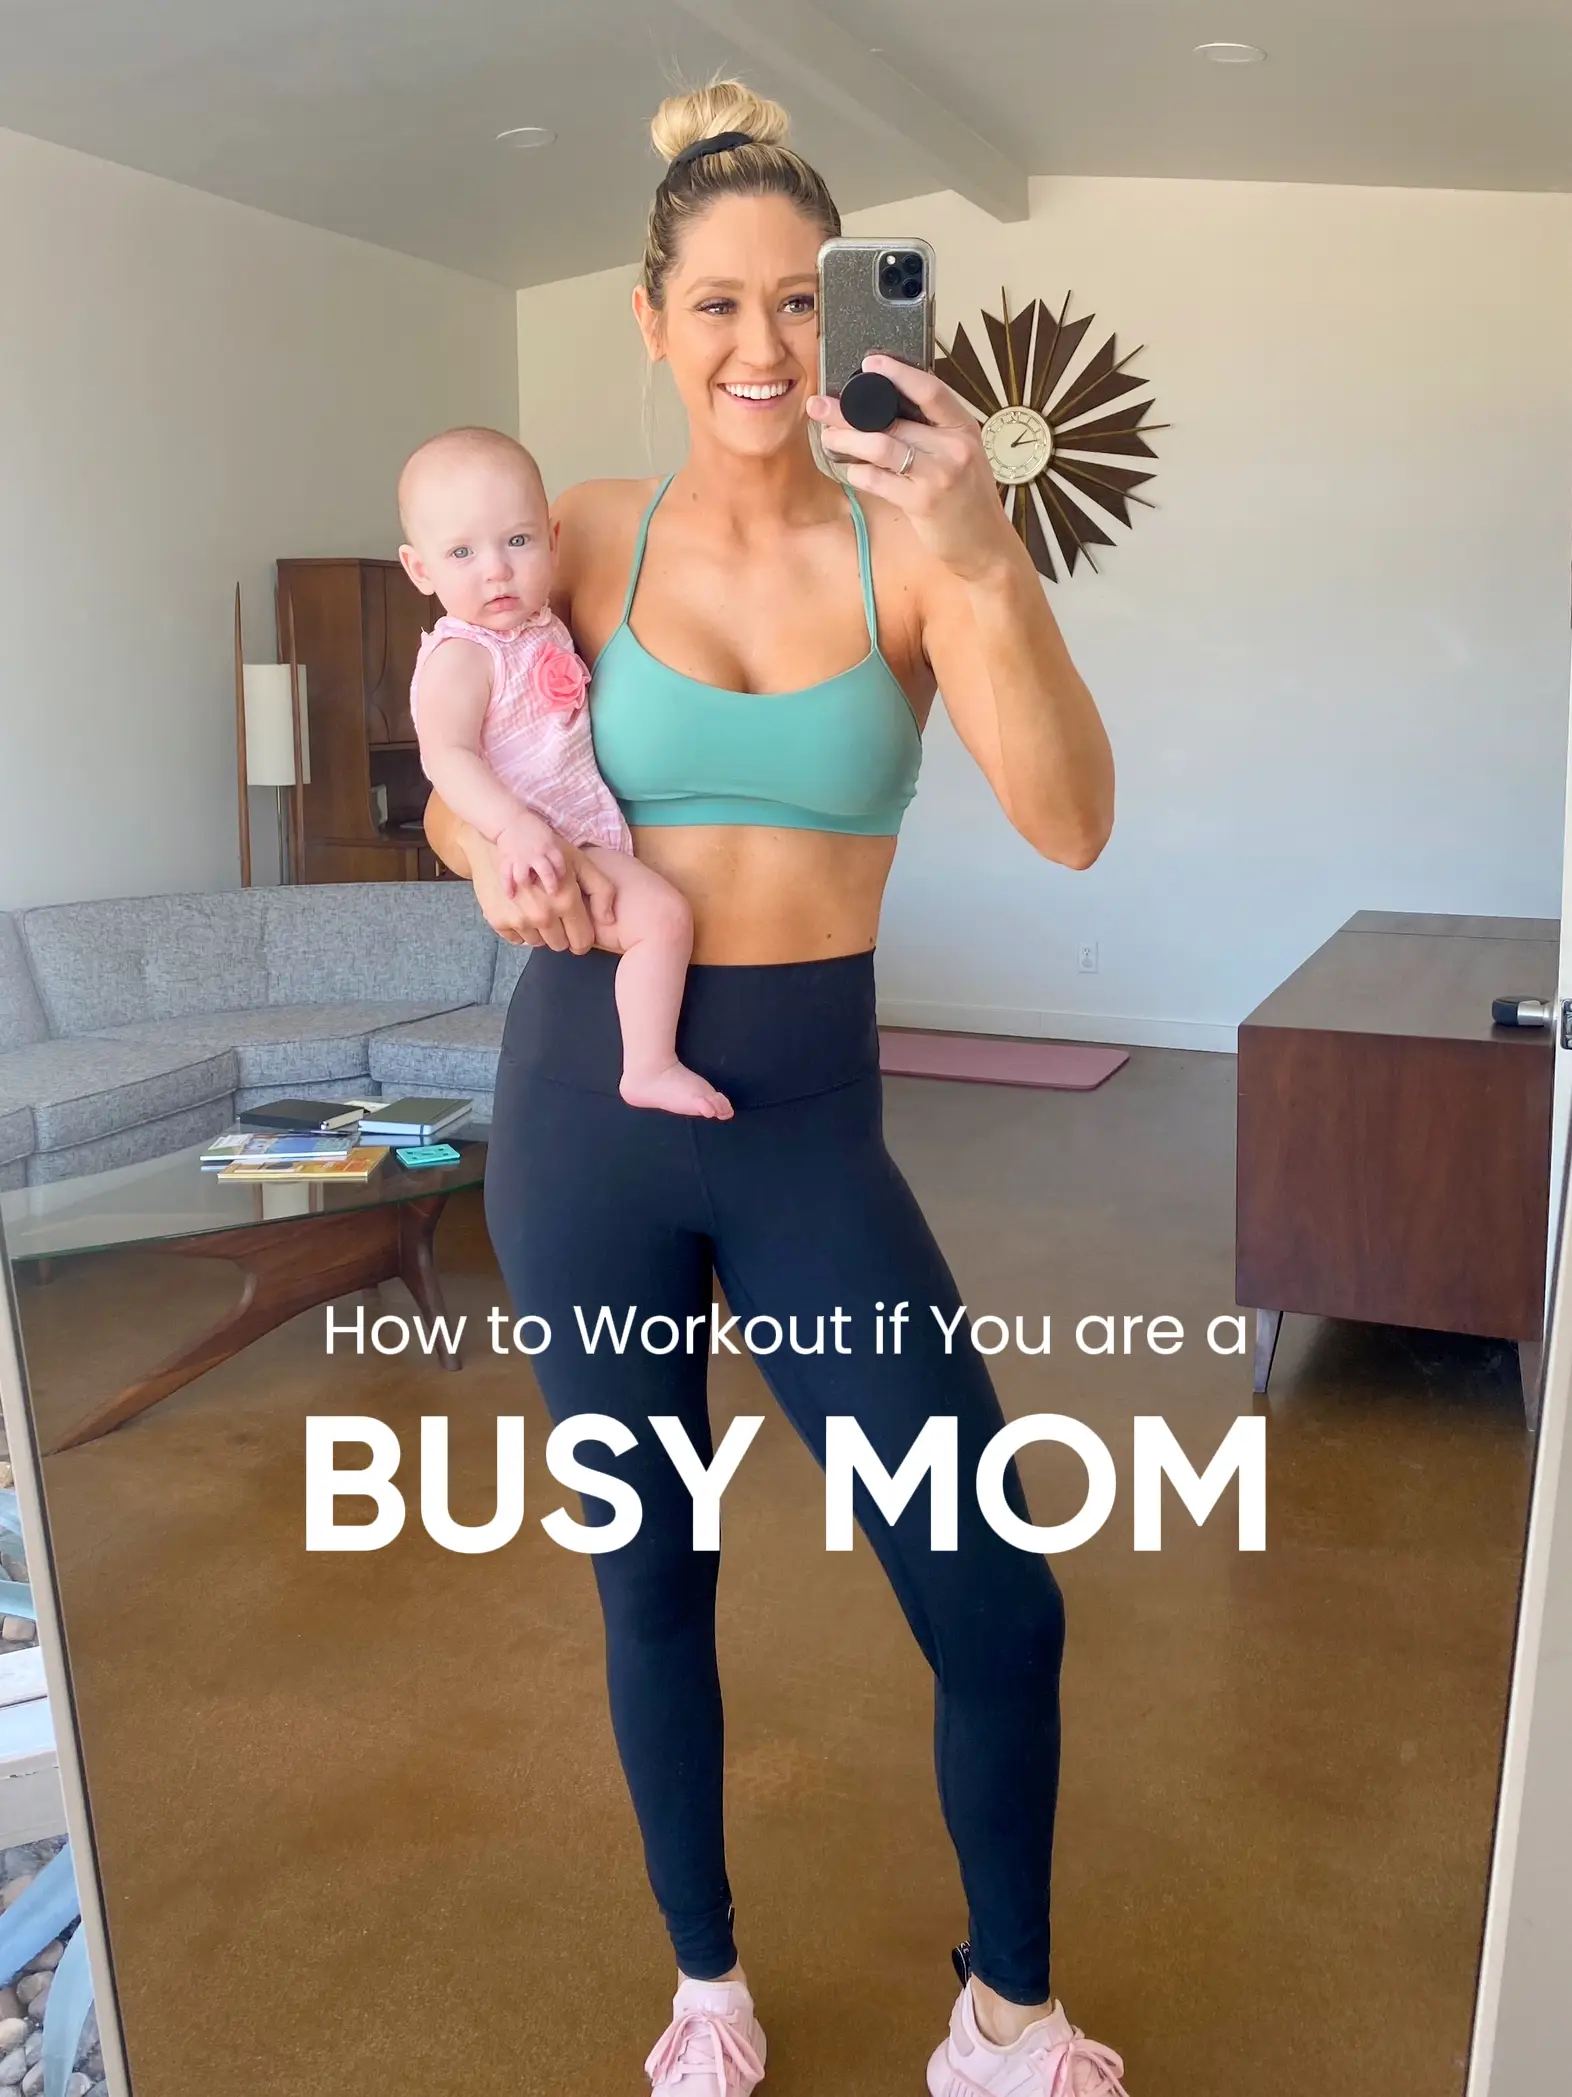 A Busy Mom's Guide to Caring for Nursing Bras - Heritage Park Laundry  Essentials